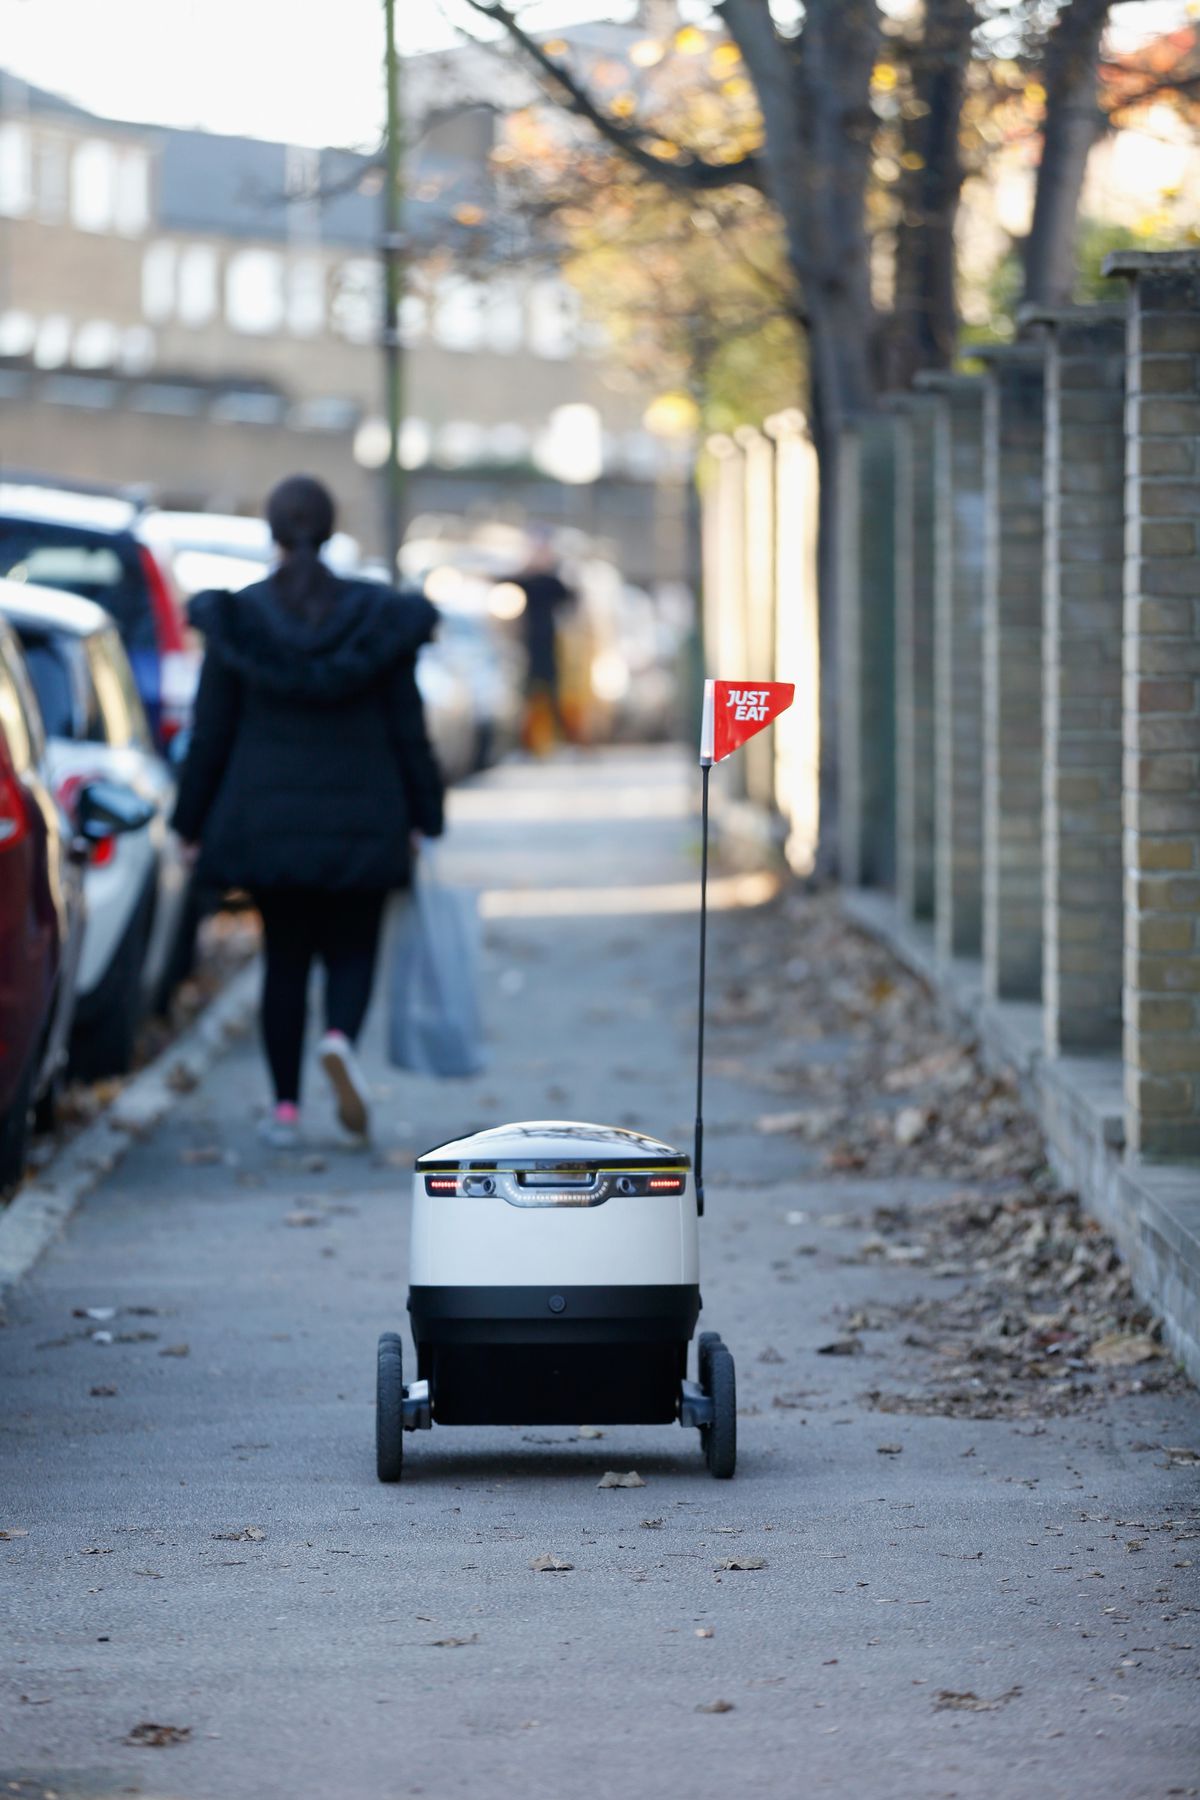 Just Eat And Starship Technologies Delivers World's First Takeaway By A Robot